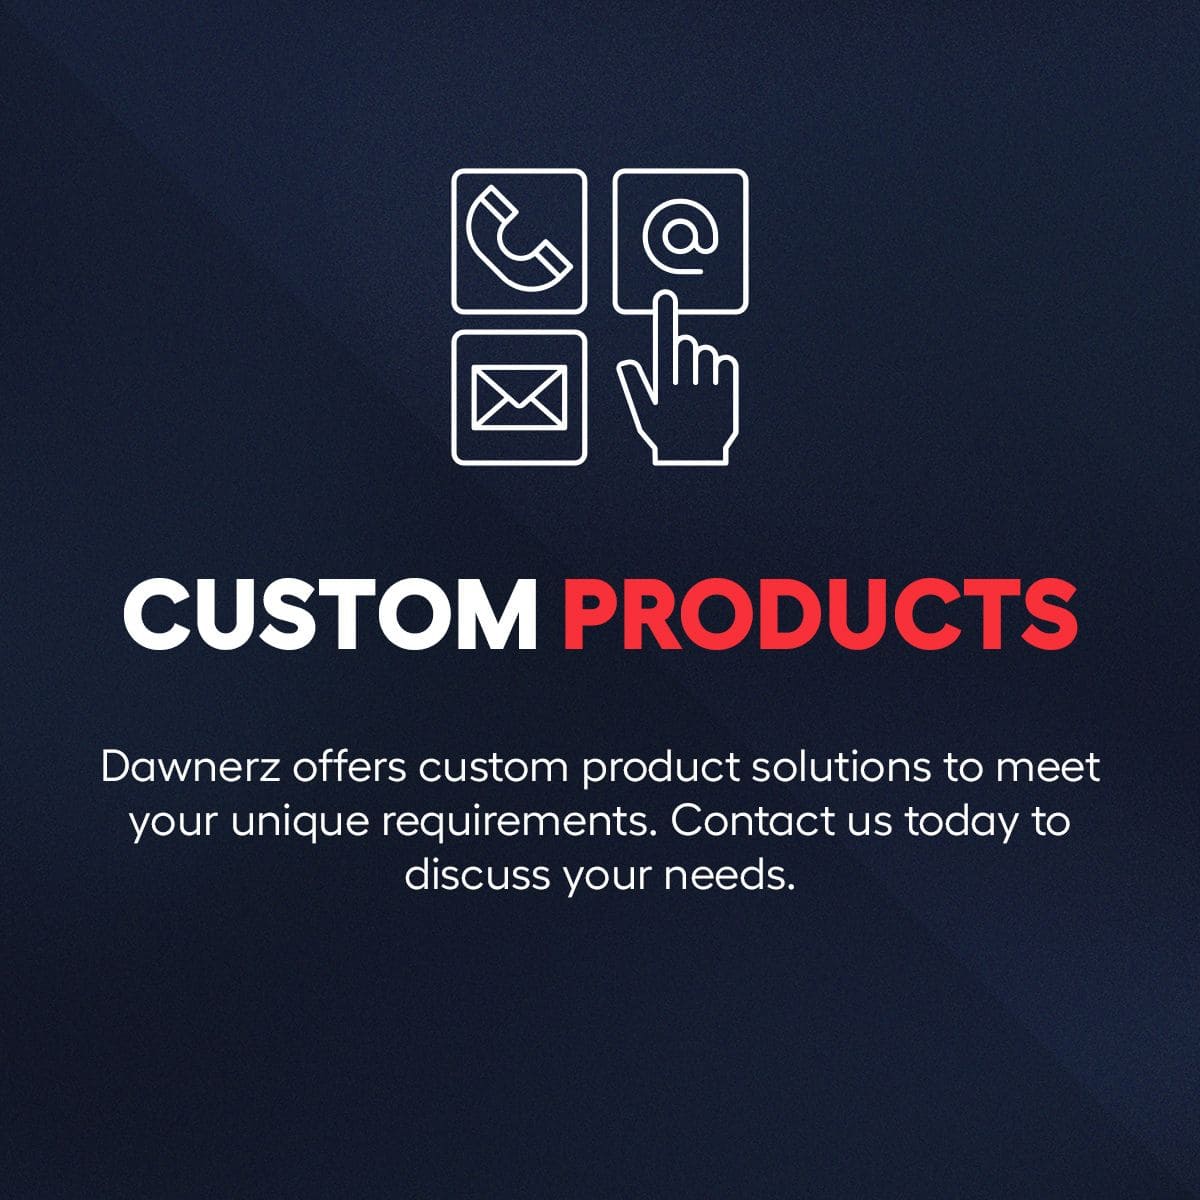 Customized Products Infographic